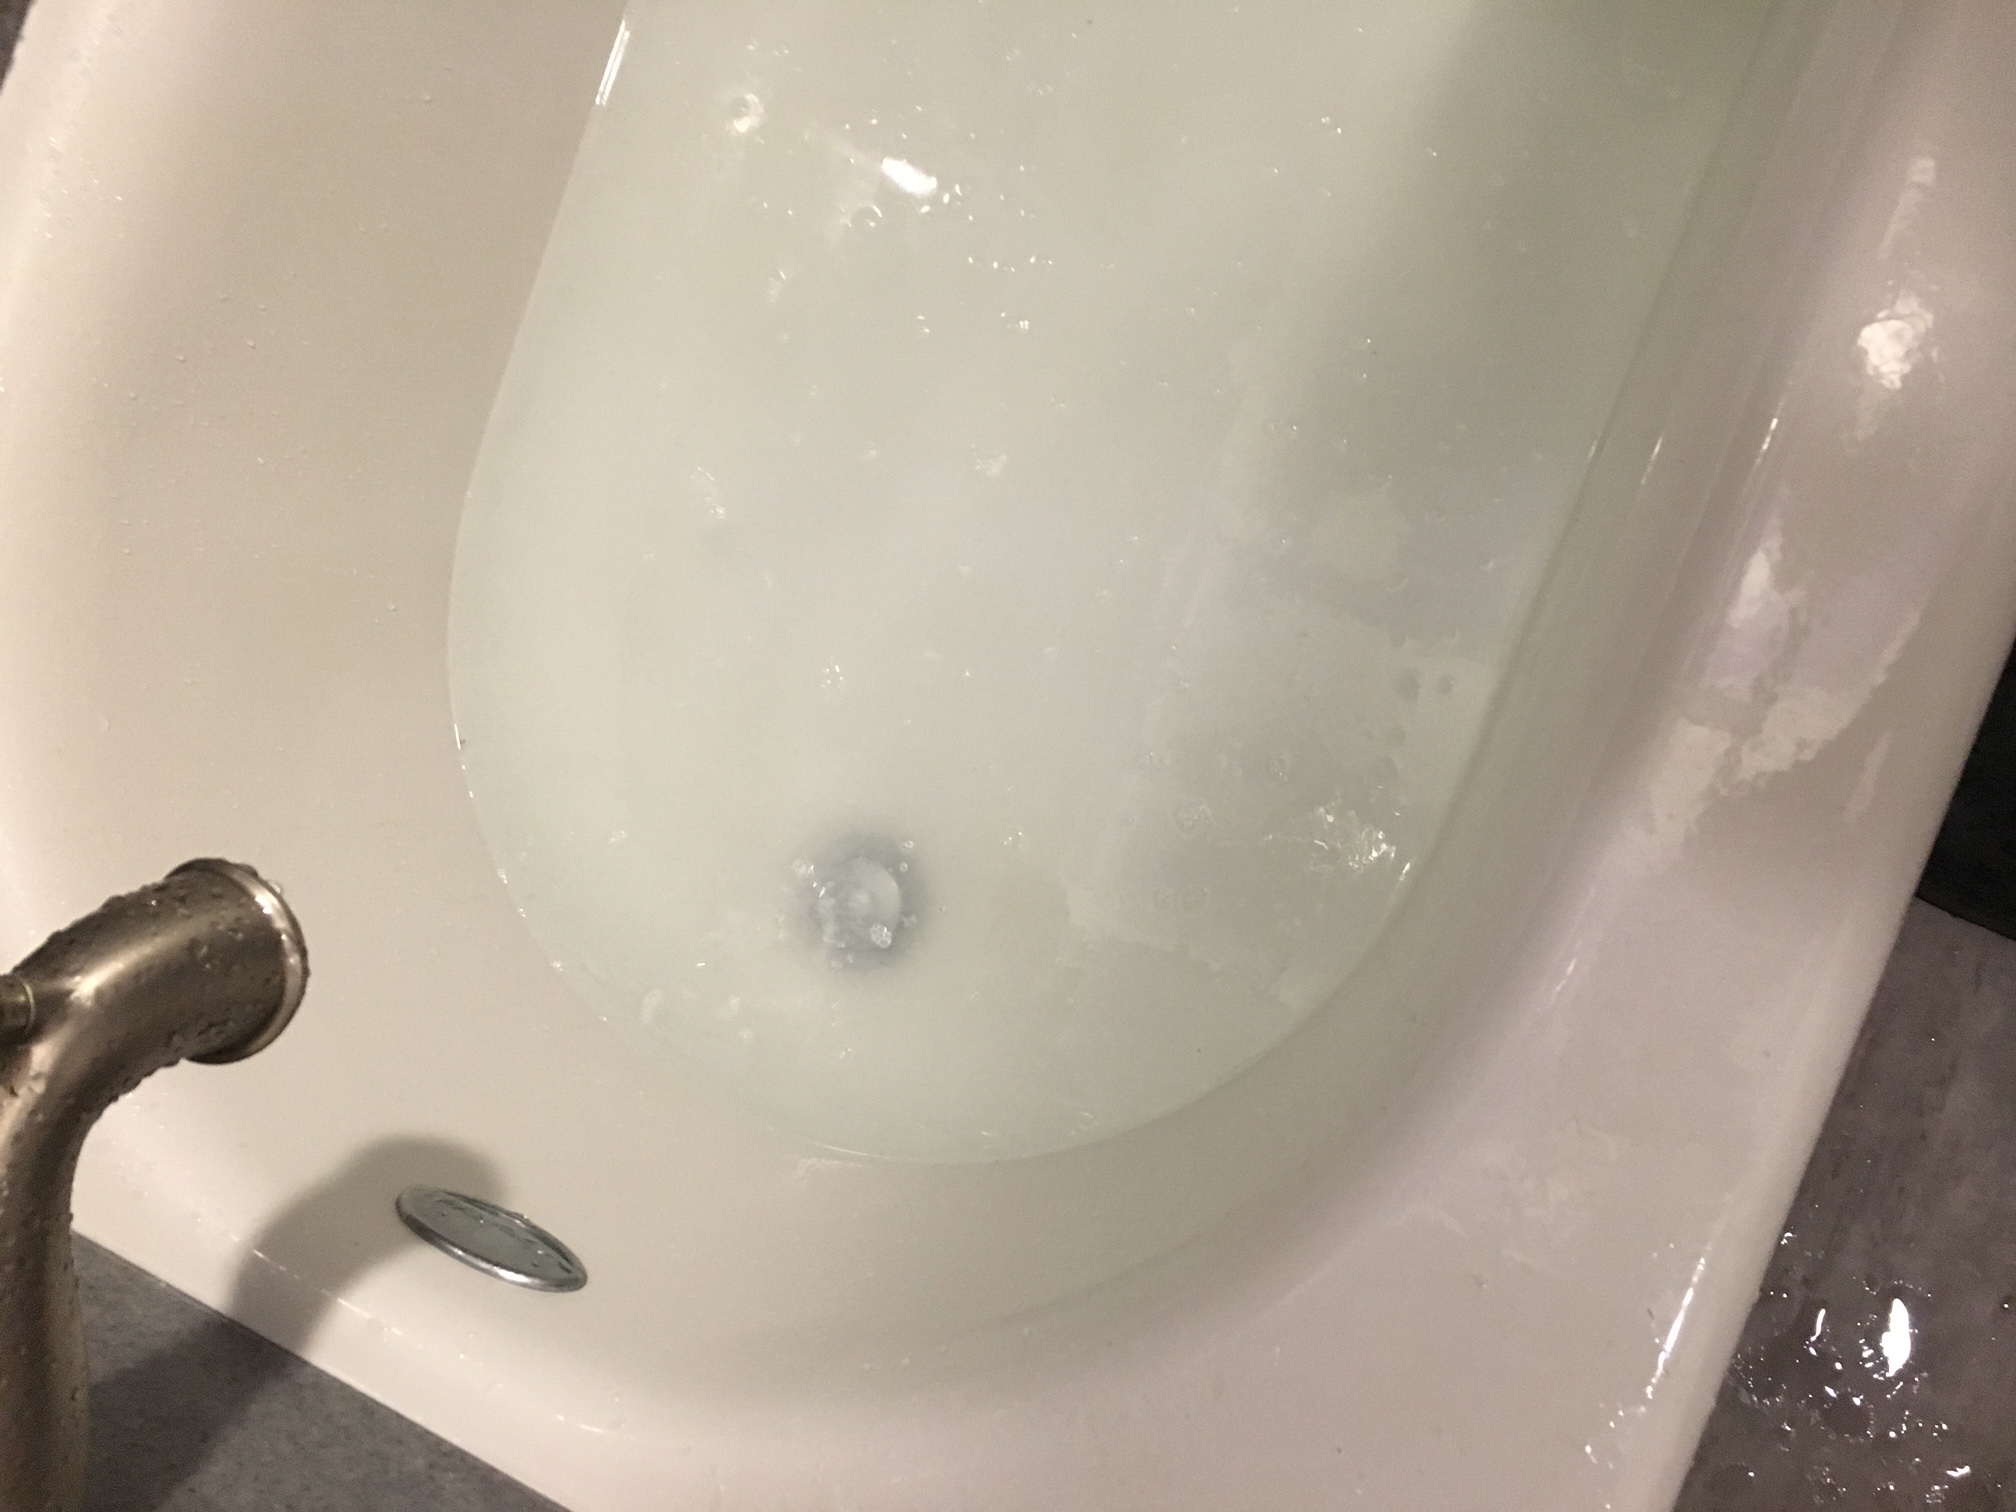 Tub wouldn't drain for days. They did not check the plumbing before they installed the tub.